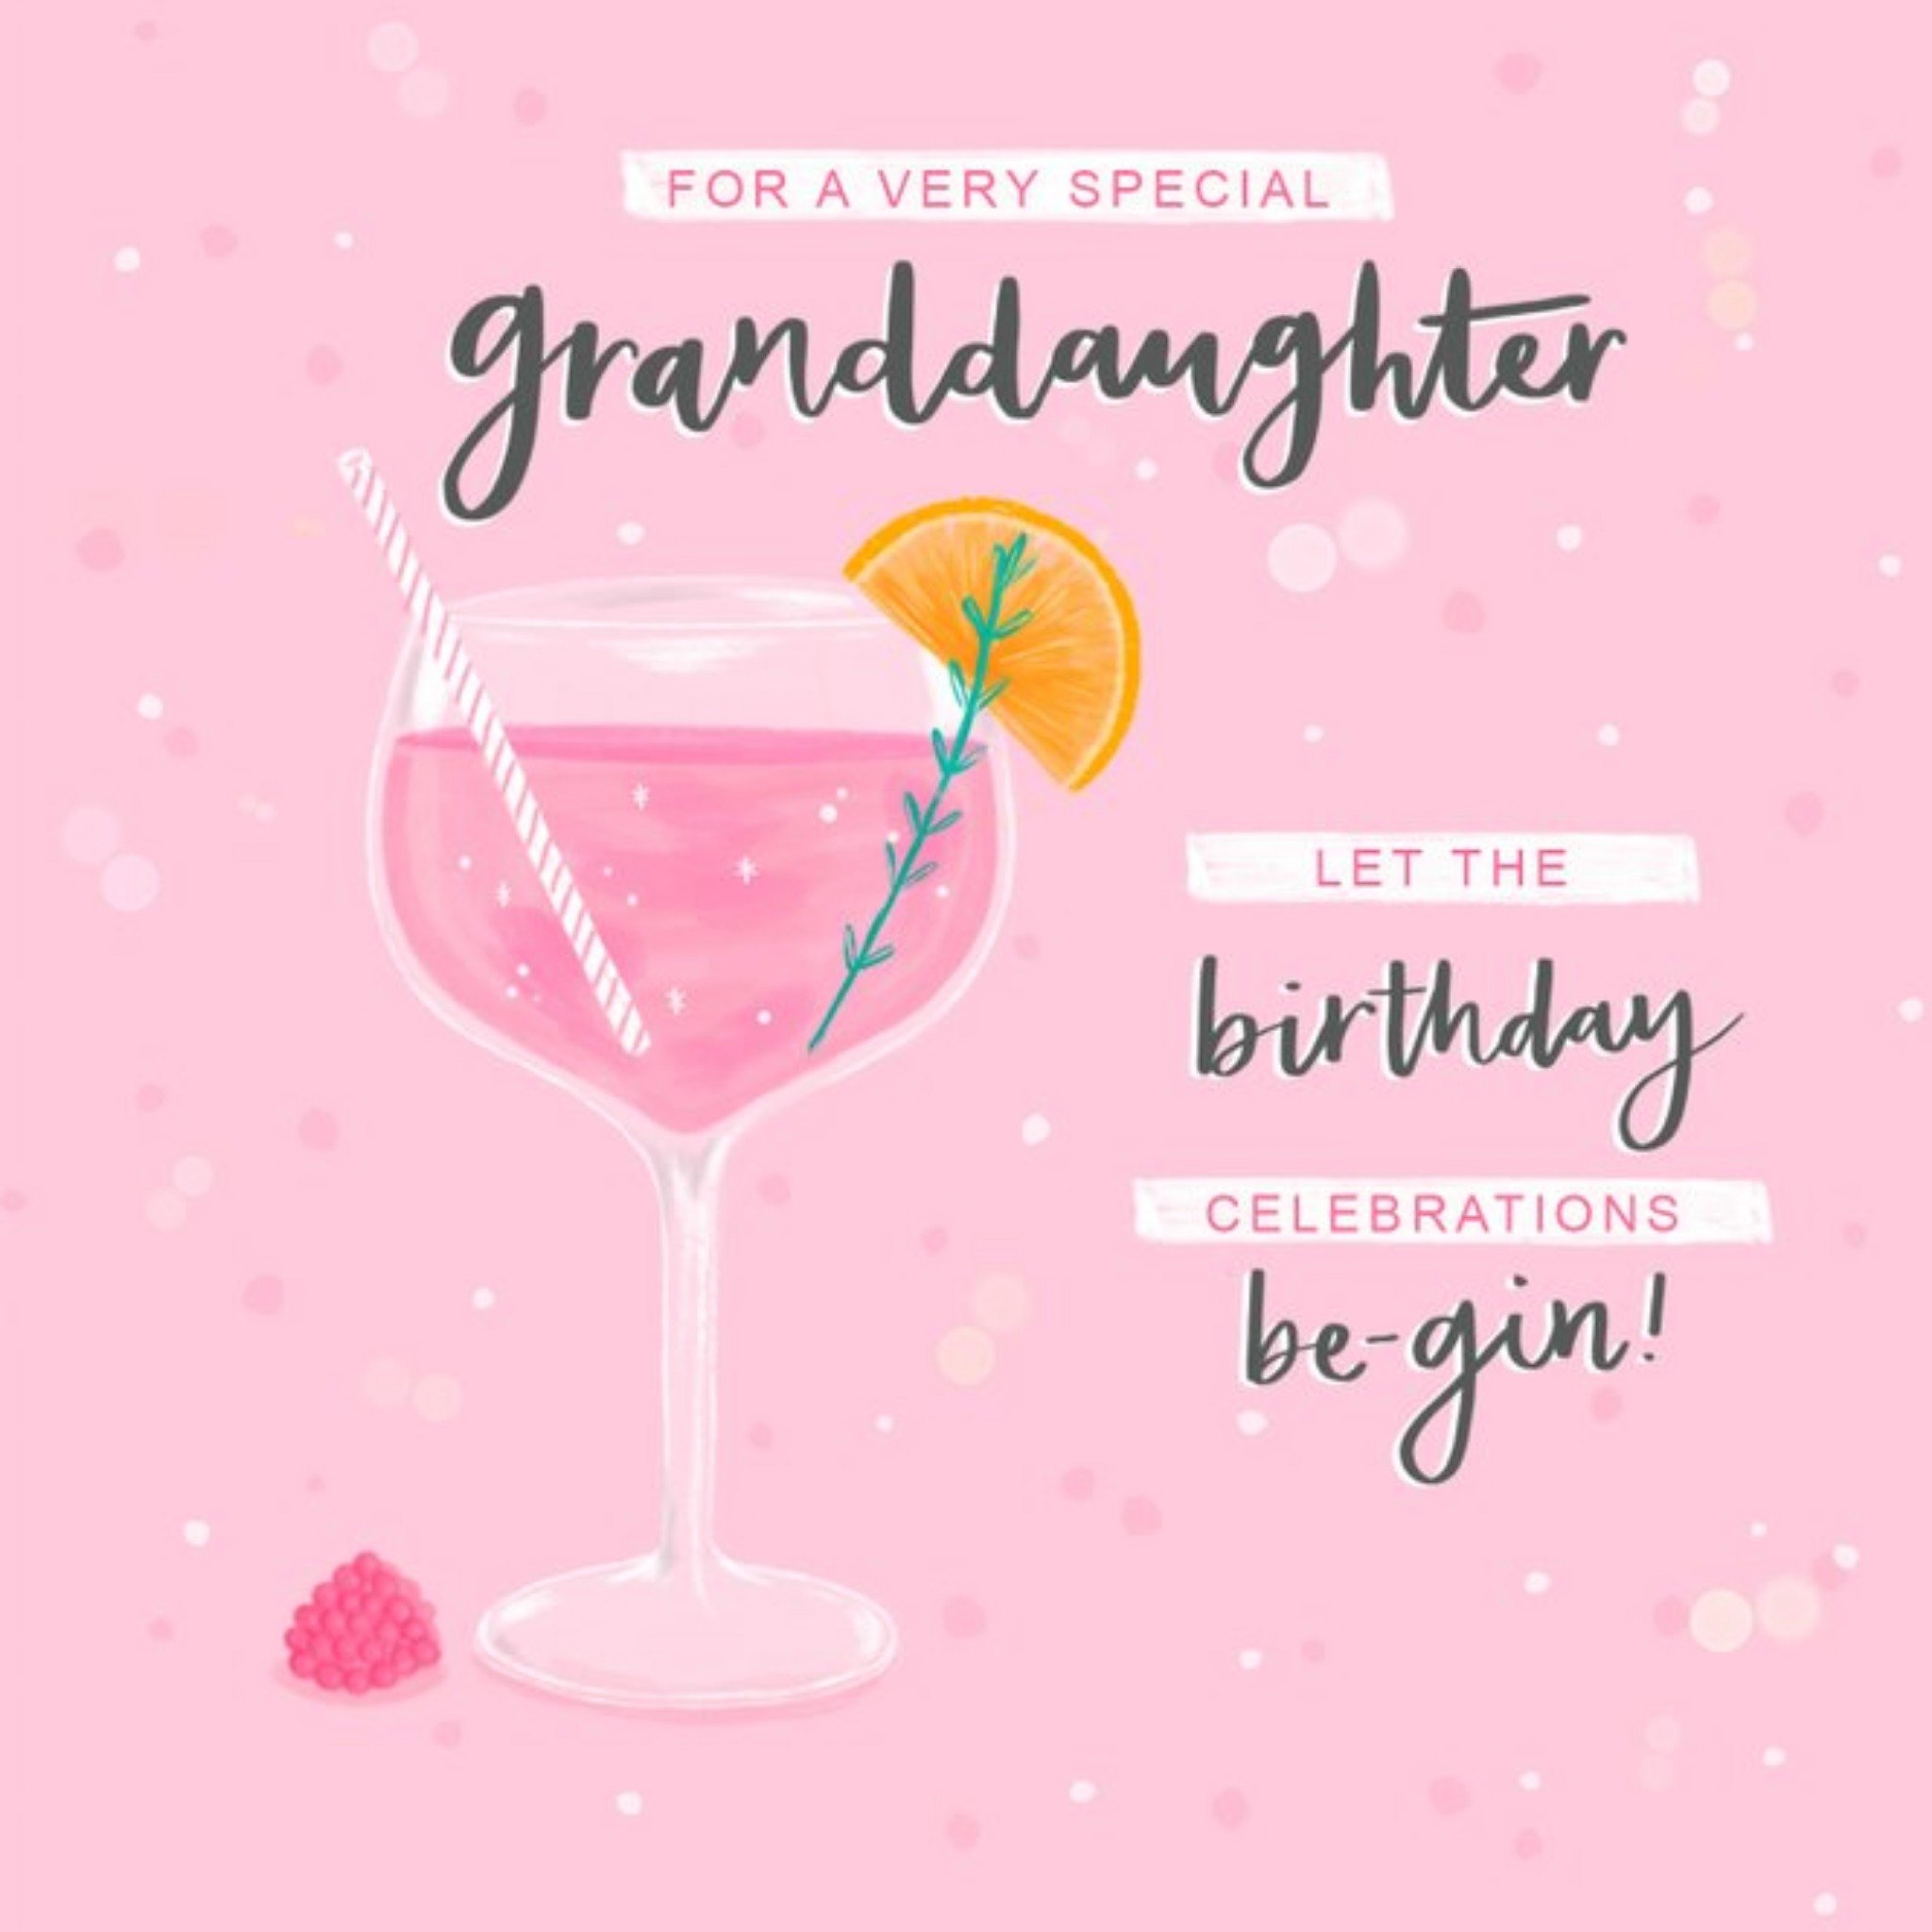 Moonpig Illustrated Gin Cocktail Glass Granddaughter Birthday Card, Large